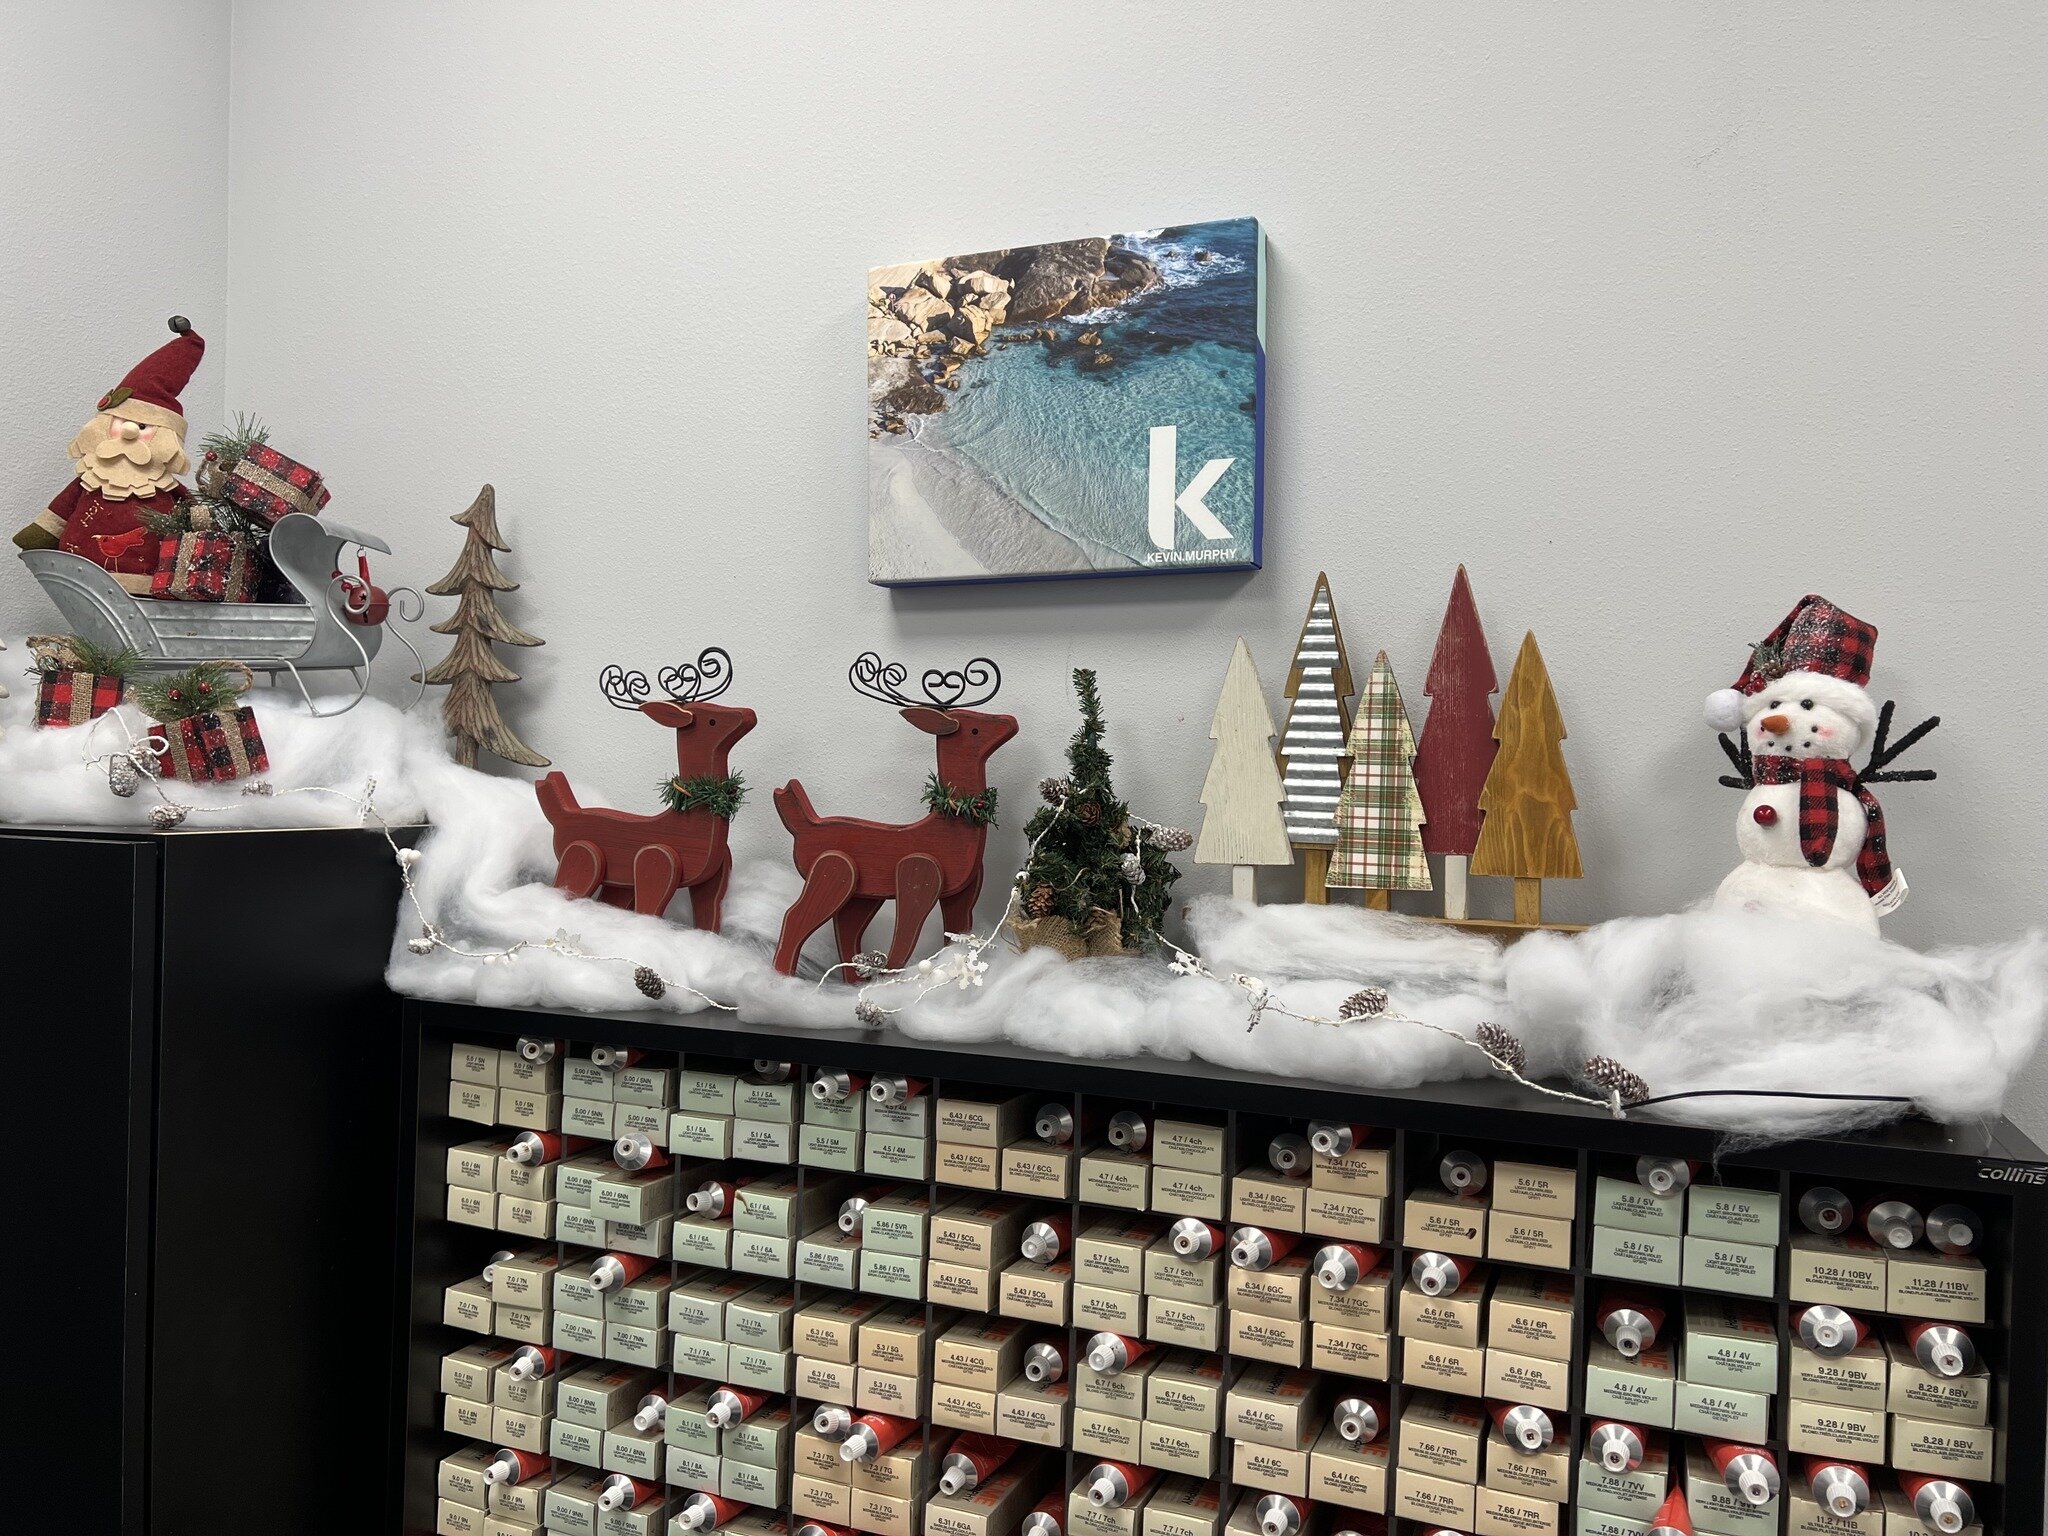 All decorated for the holidays ⛄️❄️

#naplesflorida #kevinmurphyproducts #kevinmurphysalon #napleshair #napleshaircolor #kevinmurphycolor #kevinmurphycolorme #napleshairsalon #kevinmurphy #kevinmurphyhair #napleshairstylist #naplesfl #happyholidays